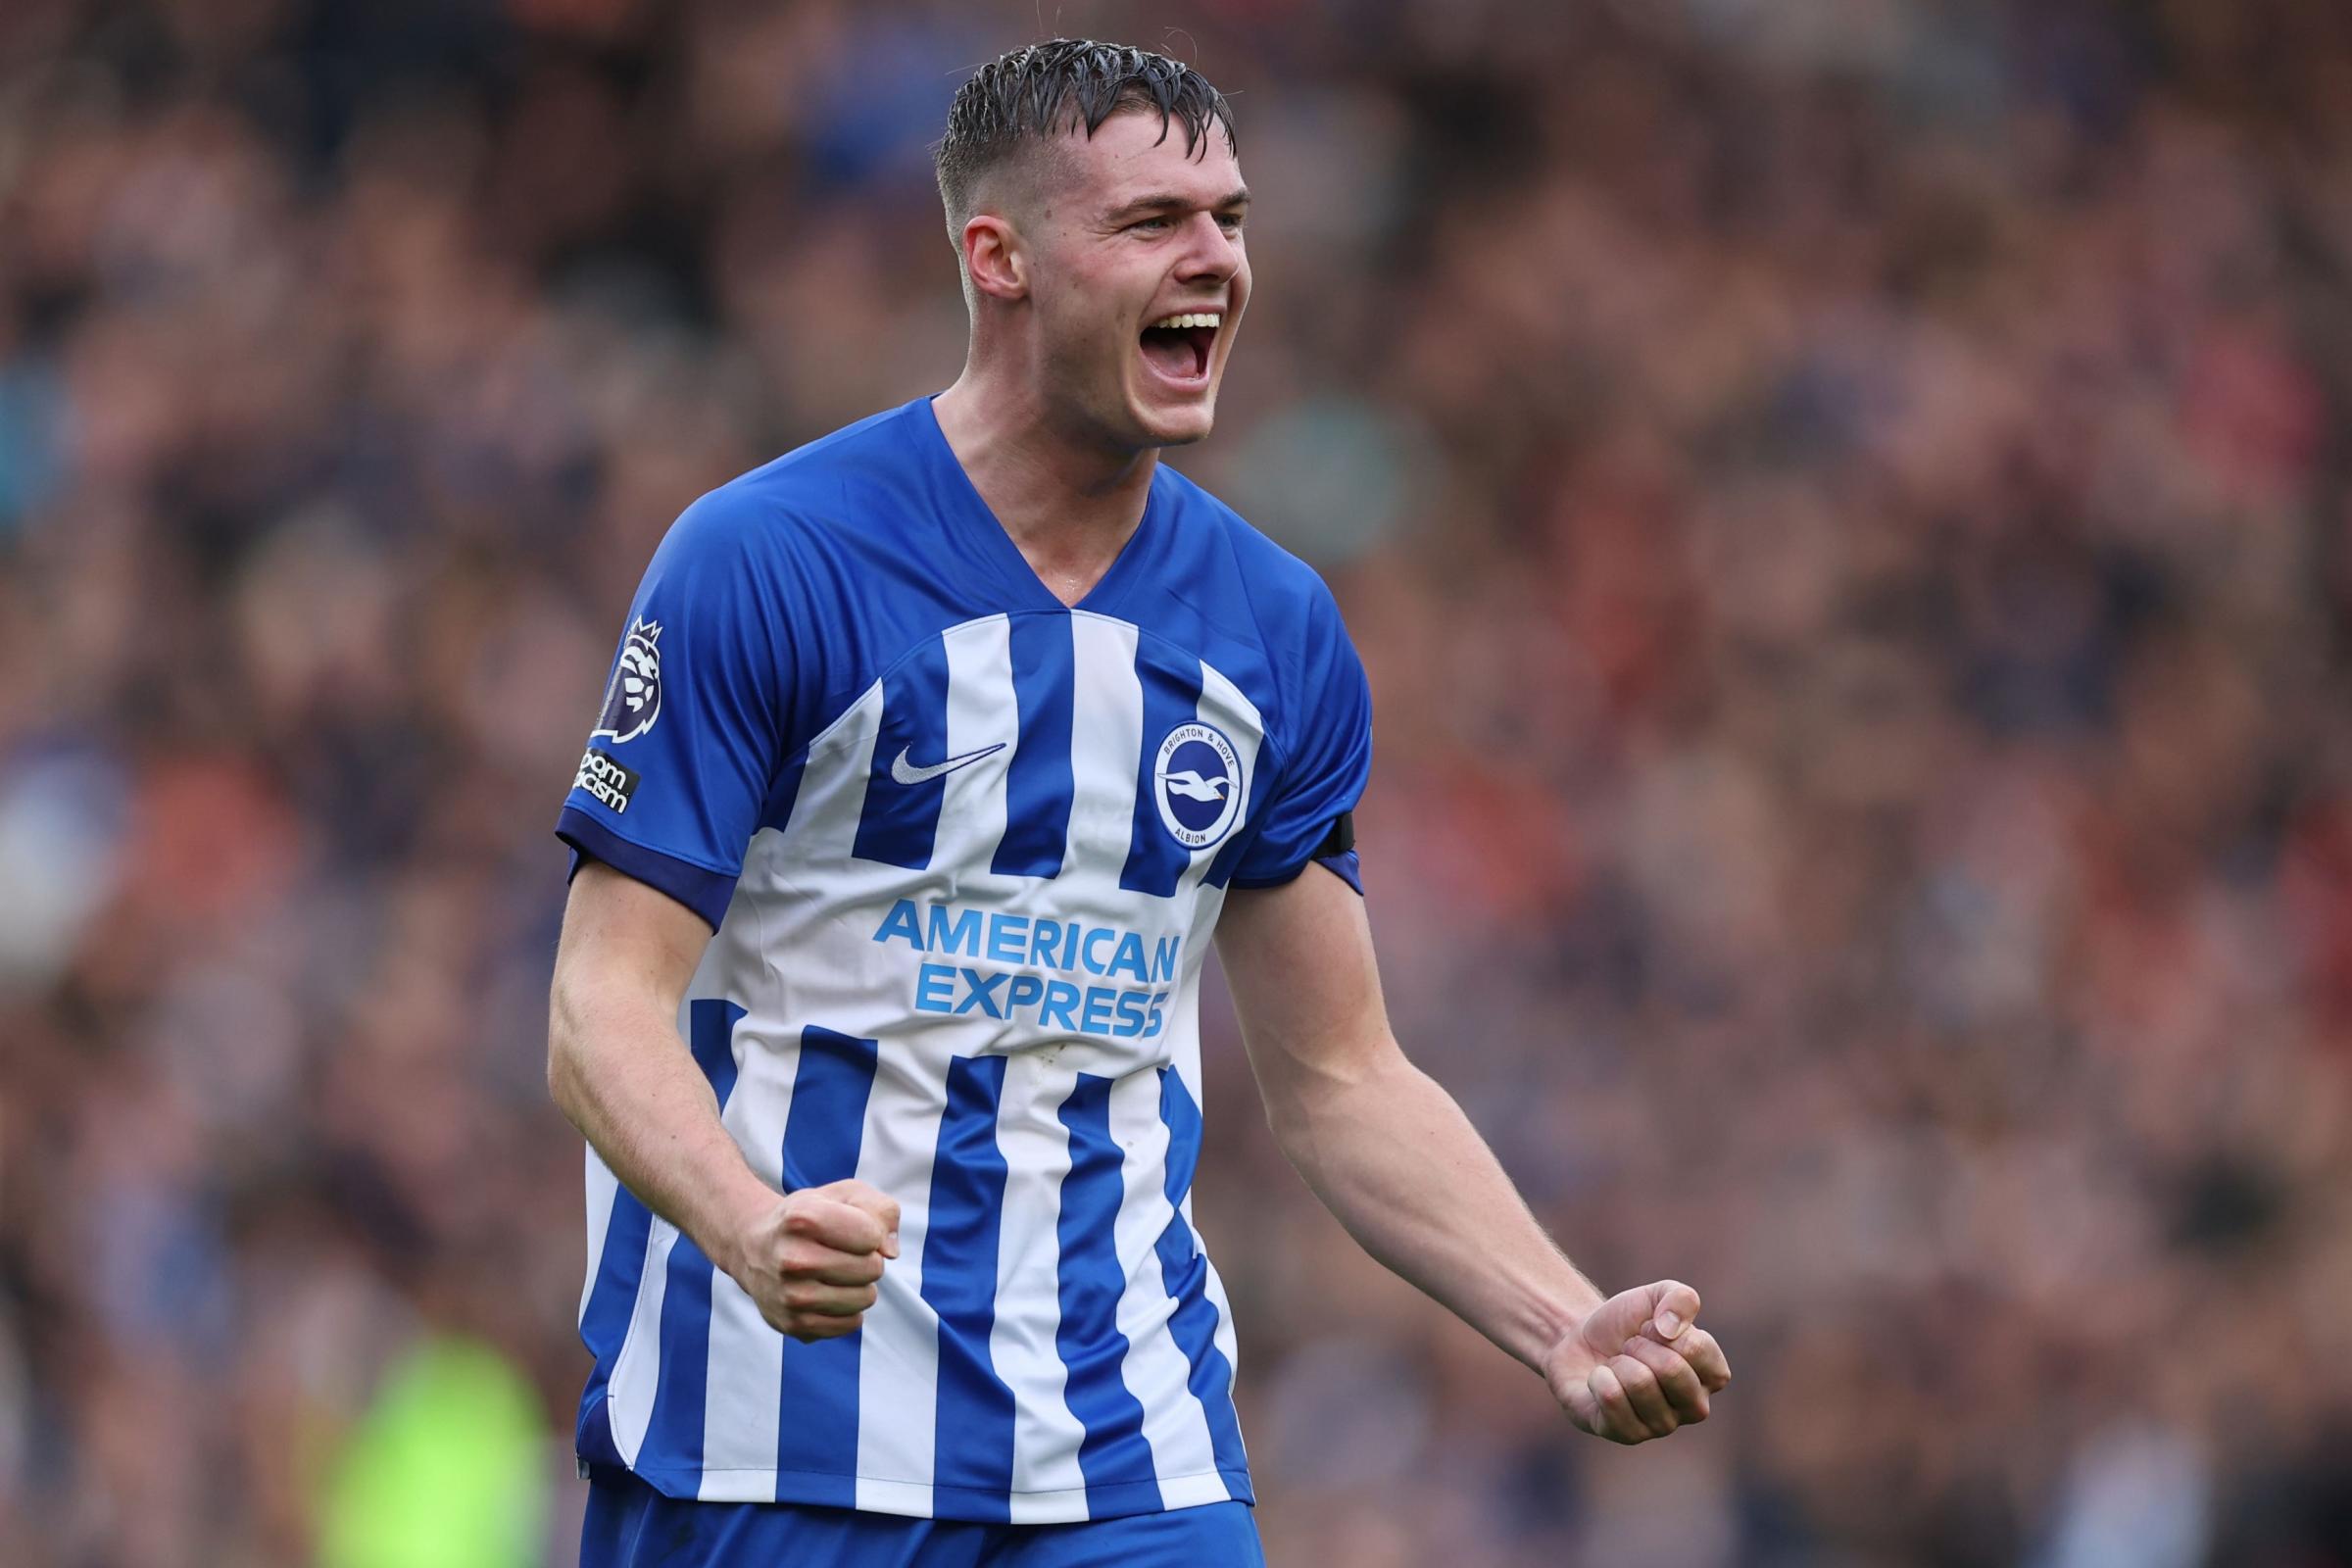 Brighton put focus on young players in first season in Europe